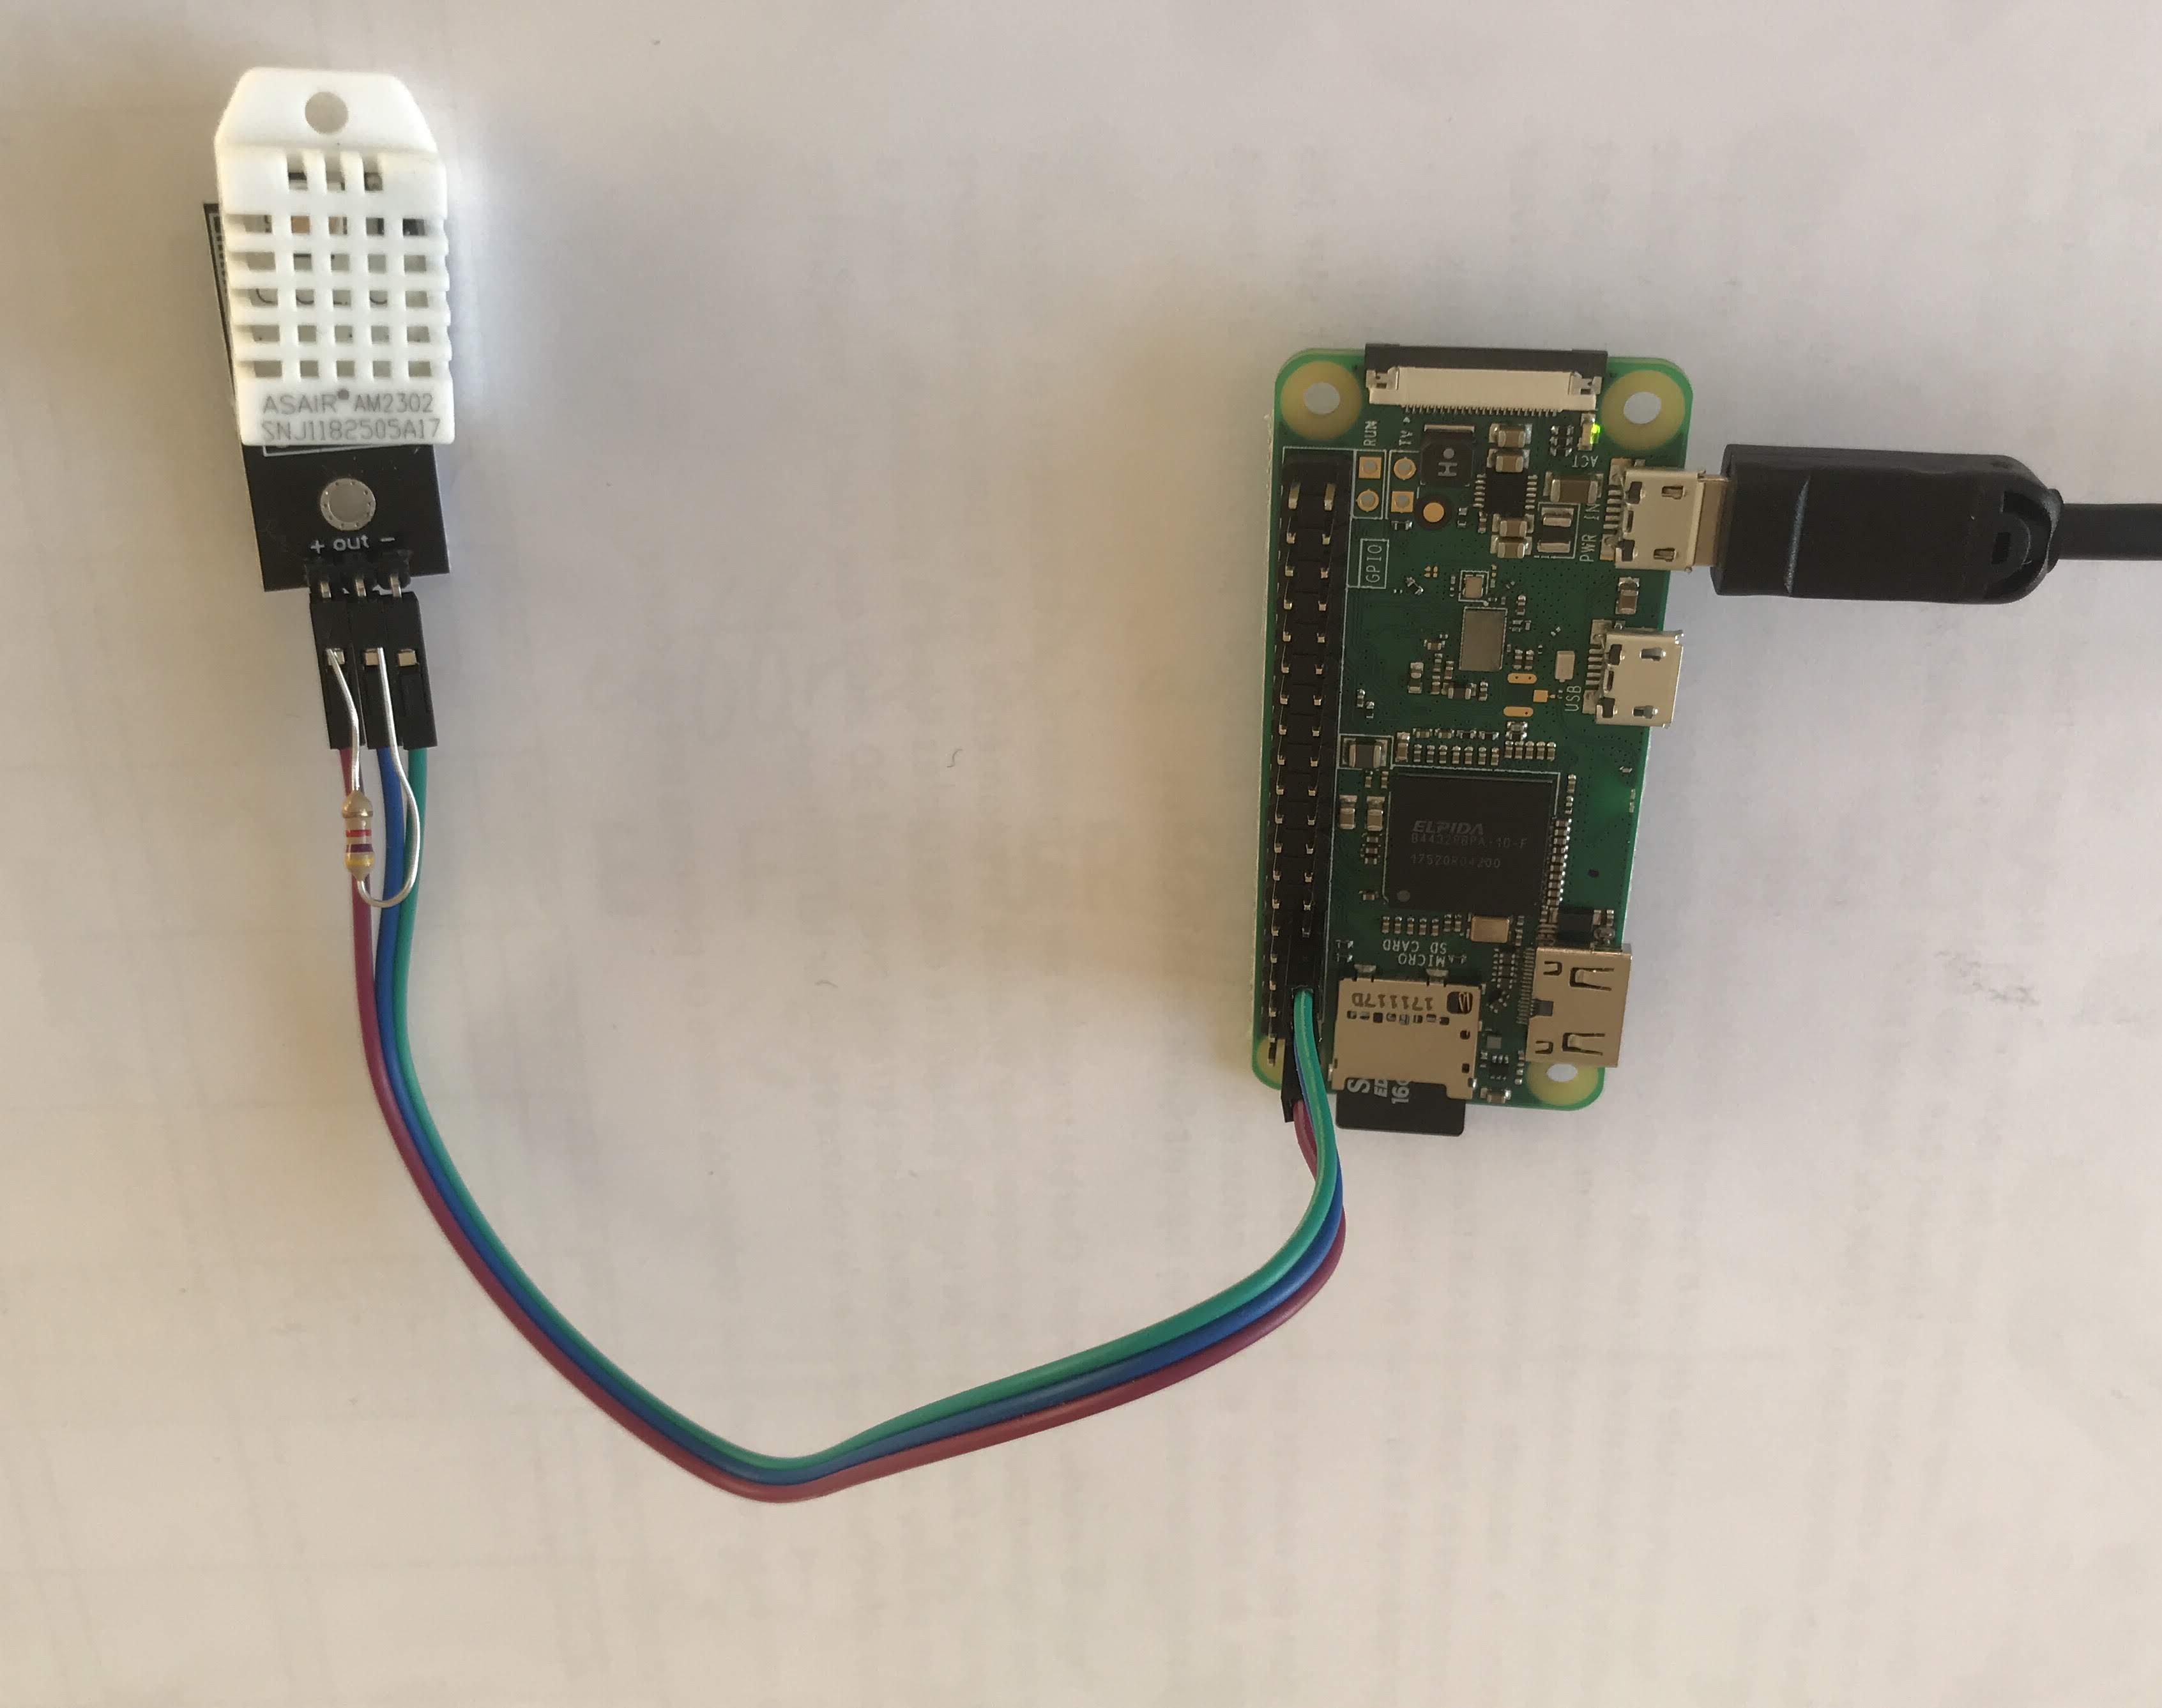 The Raspberry Pi with its attached sensor